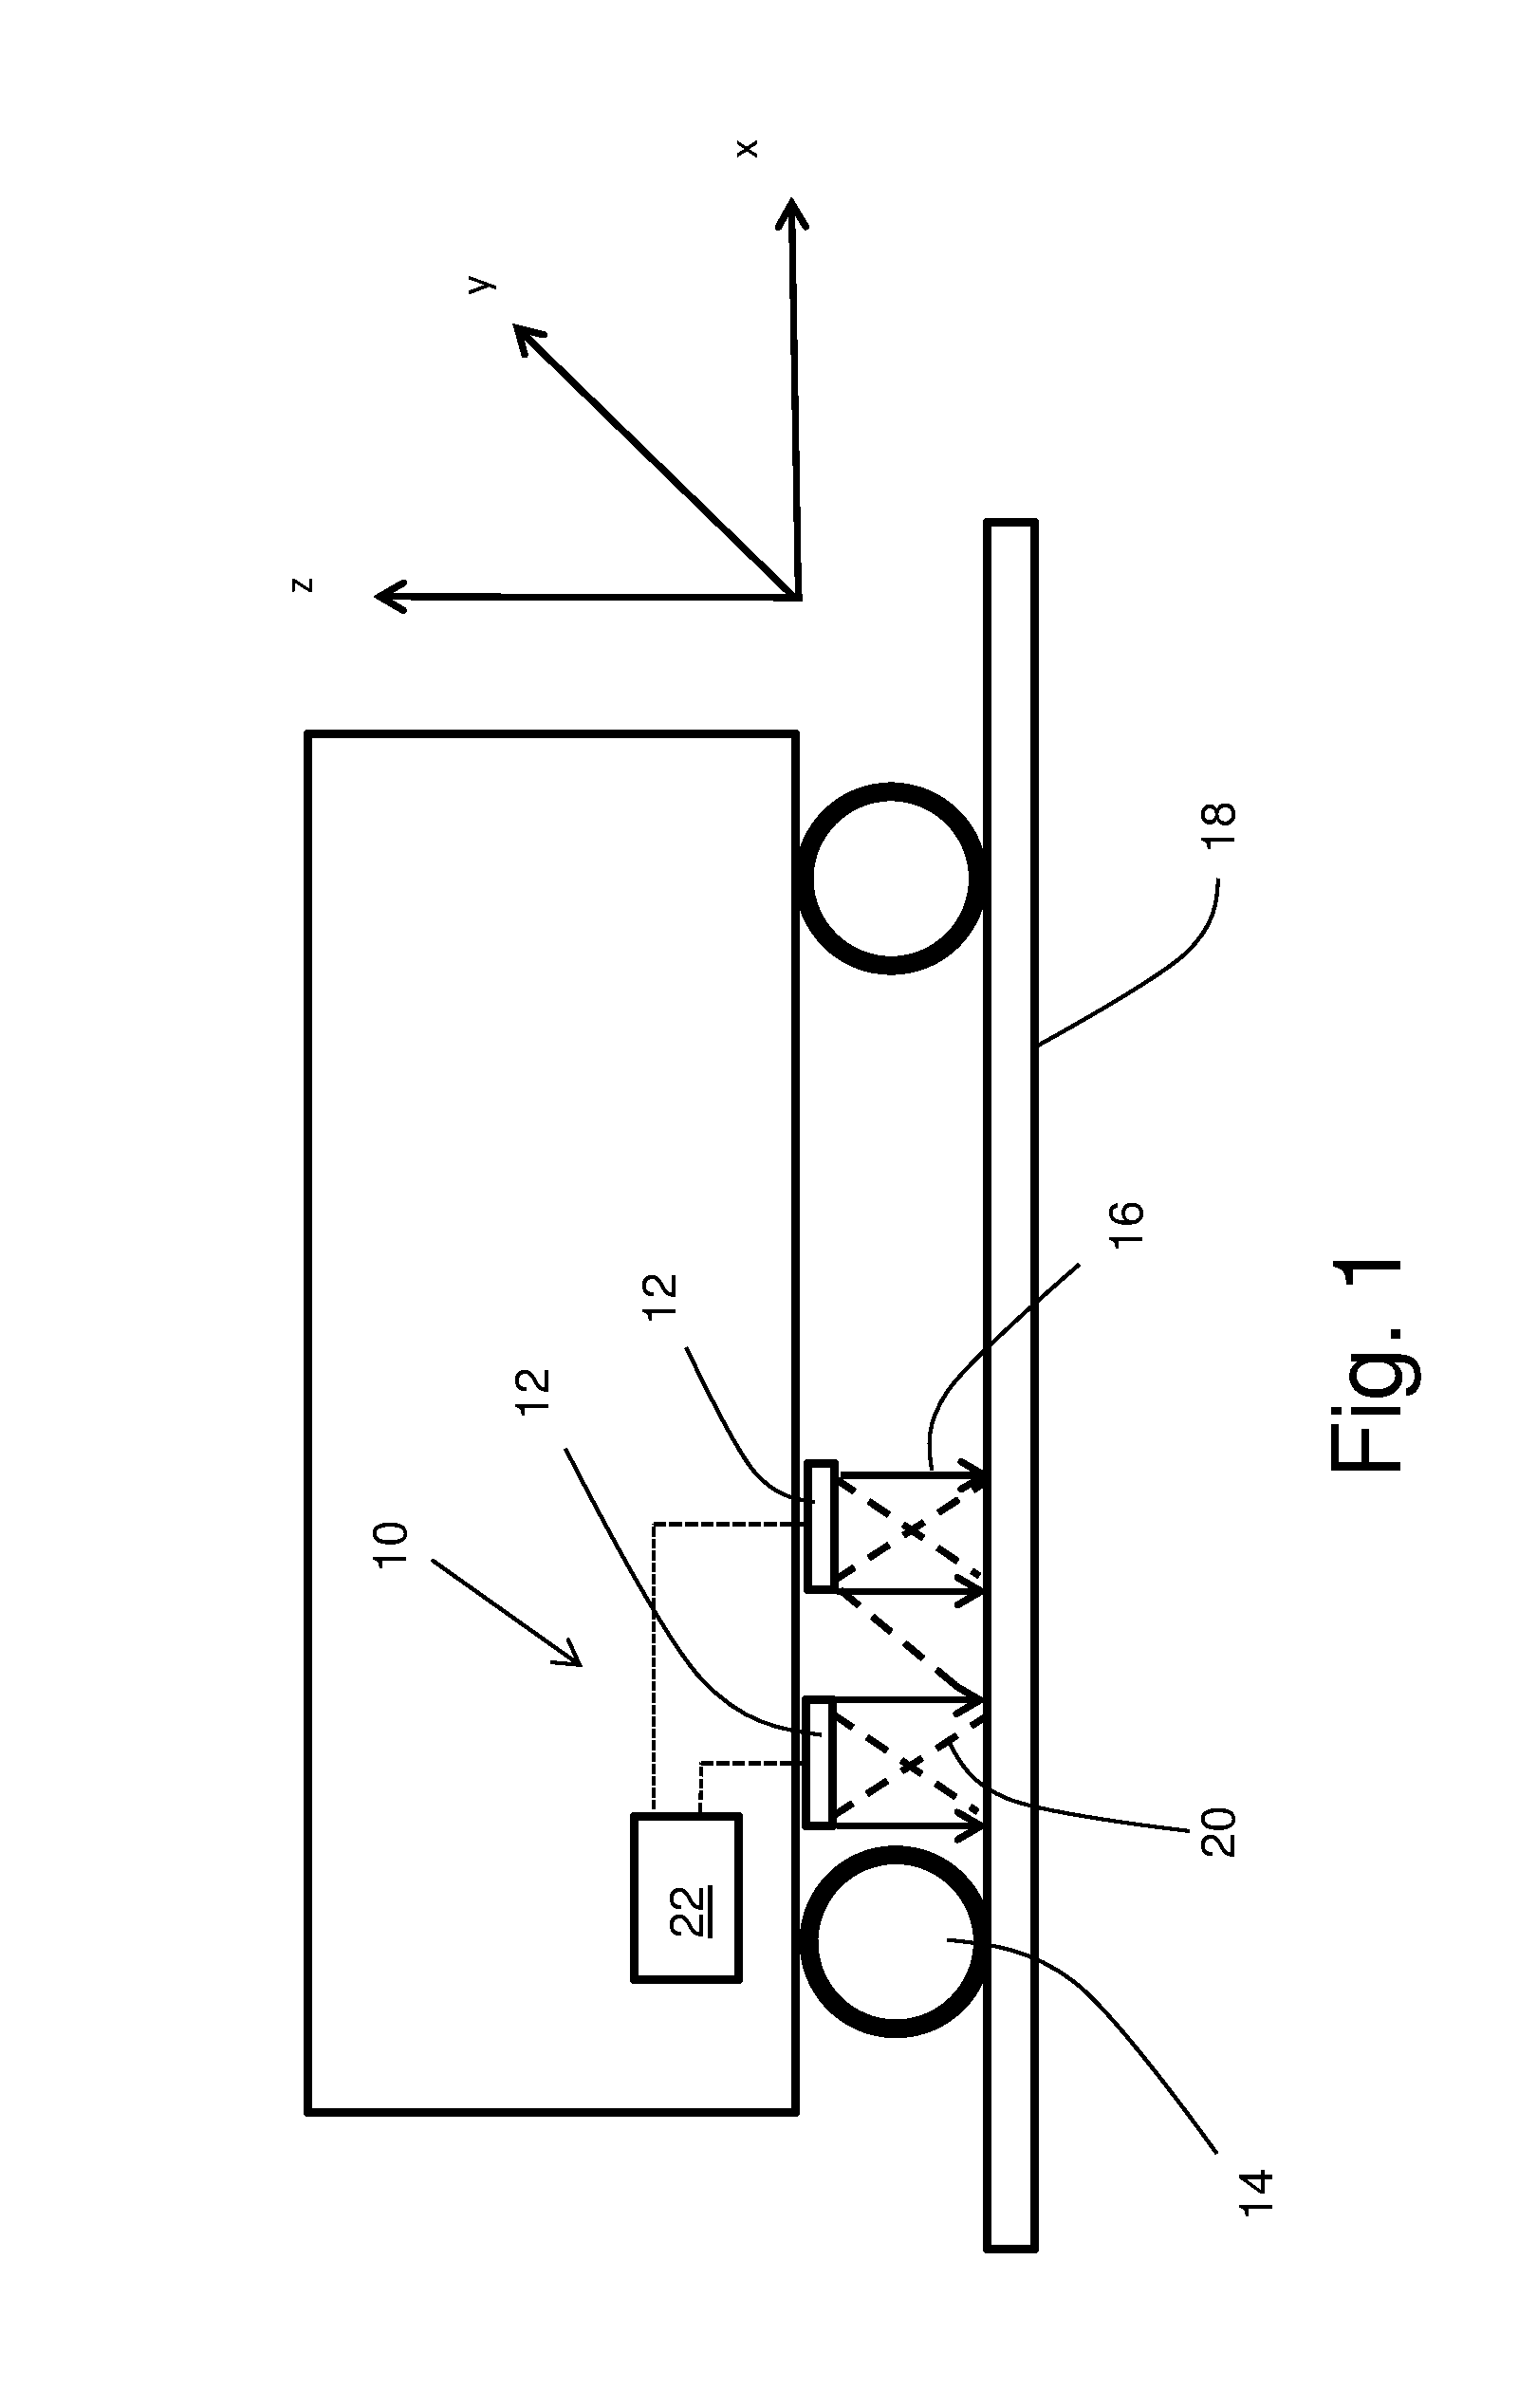 Method and apparatus to determine structural parameters of a railway track